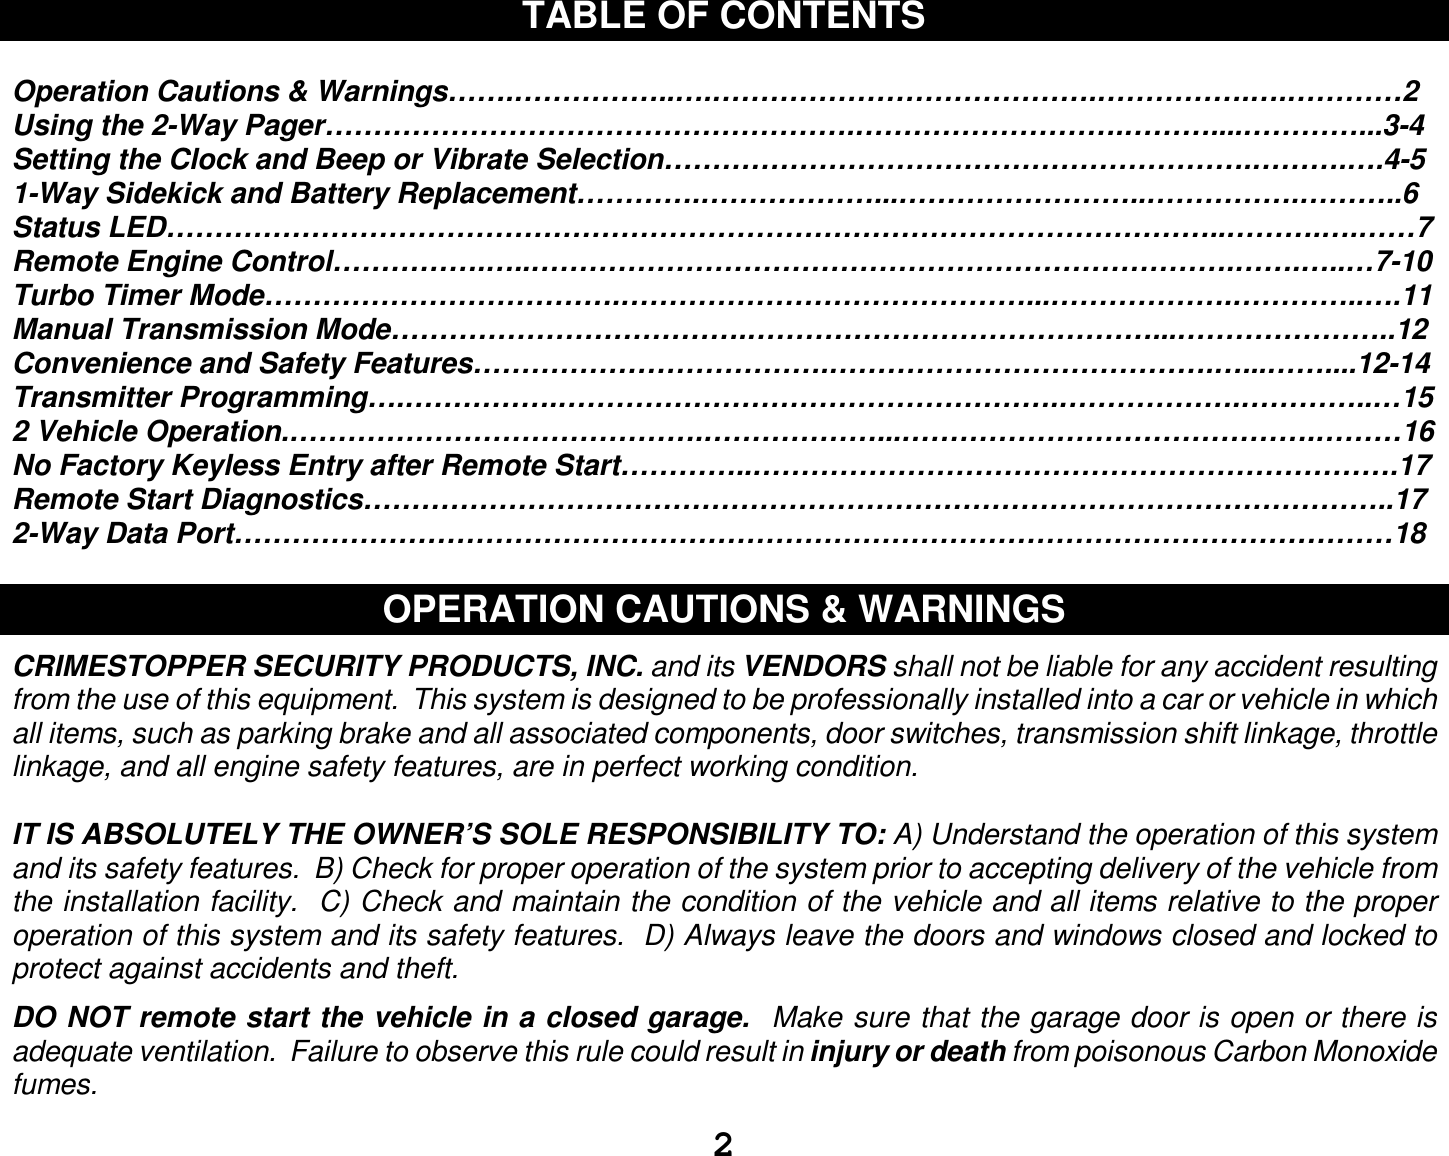  2 TABLE OF CONTENTS  Operation Cautions &amp; Warnings…….……………..….………………………………….…………….….…………2 Using the 2-Way Pager……………………………………………….……………………….………....…………...3-4 Setting the Clock and Beep or Vibrate Selection…………………………………………………….……….….4-5 1-Way Sidekick and Battery Replacement………….………………...……………………..…………….………..6 Status LED………………………………………………………………………………………………..……….….……7 Remote Engine Control…………….…..……………………………………………………………….…….…..…7-10 Turbo Timer Mode……………………………….……………………………………...……………….…………..….11 Manual Transmission Mode……………………………….……………………………………...…………………..12 Convenience and Safety Features……………………………….………………………………….…...……....12-14 Transmitter Programming….…………….…………………………………………….……………….…………..…15 2 Vehicle Operation.…………………………………….………………...…………………………………….………16 No Factory Keyless Entry after Remote Start…………..………………………………………………………….17 Remote Start Diagnostics……………………………………………………………………………………………..17 2-Way Data Port…………………………………………………………………………………………………………18  OPERATION CAUTIONS &amp; WARNINGS  CRIMESTOPPER SECURITY PRODUCTS, INC. and its VENDORS shall not be liable for any accident resulting from the use of this equipment.  This system is designed to be professionally installed into a car or vehicle in which all items, such as parking brake and all associated components, door switches, transmission shift linkage, throttle linkage, and all engine safety features, are in perfect working condition.  IT IS ABSOLUTELY THE OWNER’S SOLE RESPONSIBILITY TO: A) Understand the operation of this system and its safety features.  B) Check for proper operation of the system prior to accepting delivery of the vehicle from the installation facility.  C) Check and maintain the condition of the vehicle and all items relative to the proper operation of this system and its safety features.  D) Always leave the doors and windows closed and locked to protect against accidents and theft.  DO NOT remote start the vehicle in a closed garage.  Make sure that the garage door is open or there is adequate ventilation.  Failure to observe this rule could result in injury or death from poisonous Carbon Monoxide fumes.  